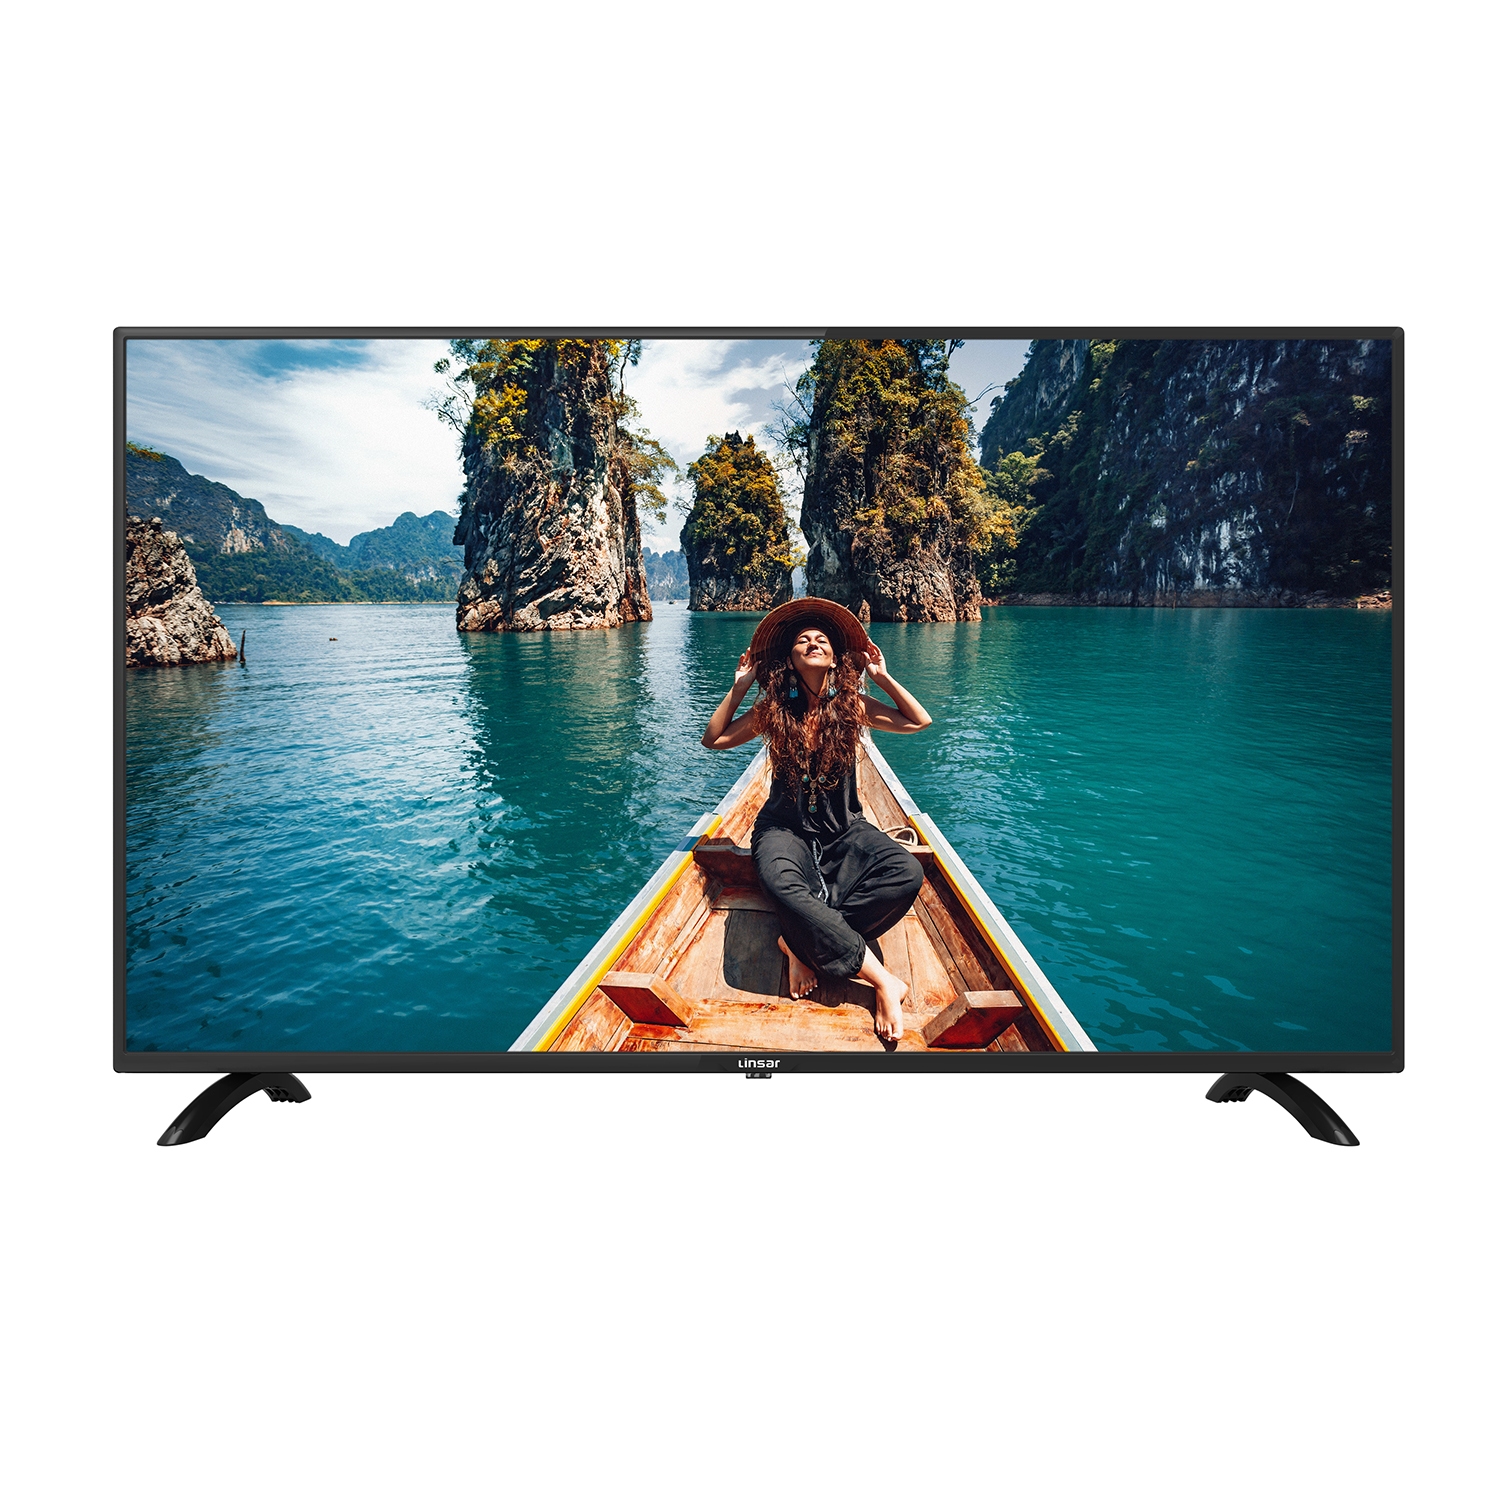 Linsar GT43LUXE 43" Full HD TV - Freeview Play and USB Record/Playback - 0